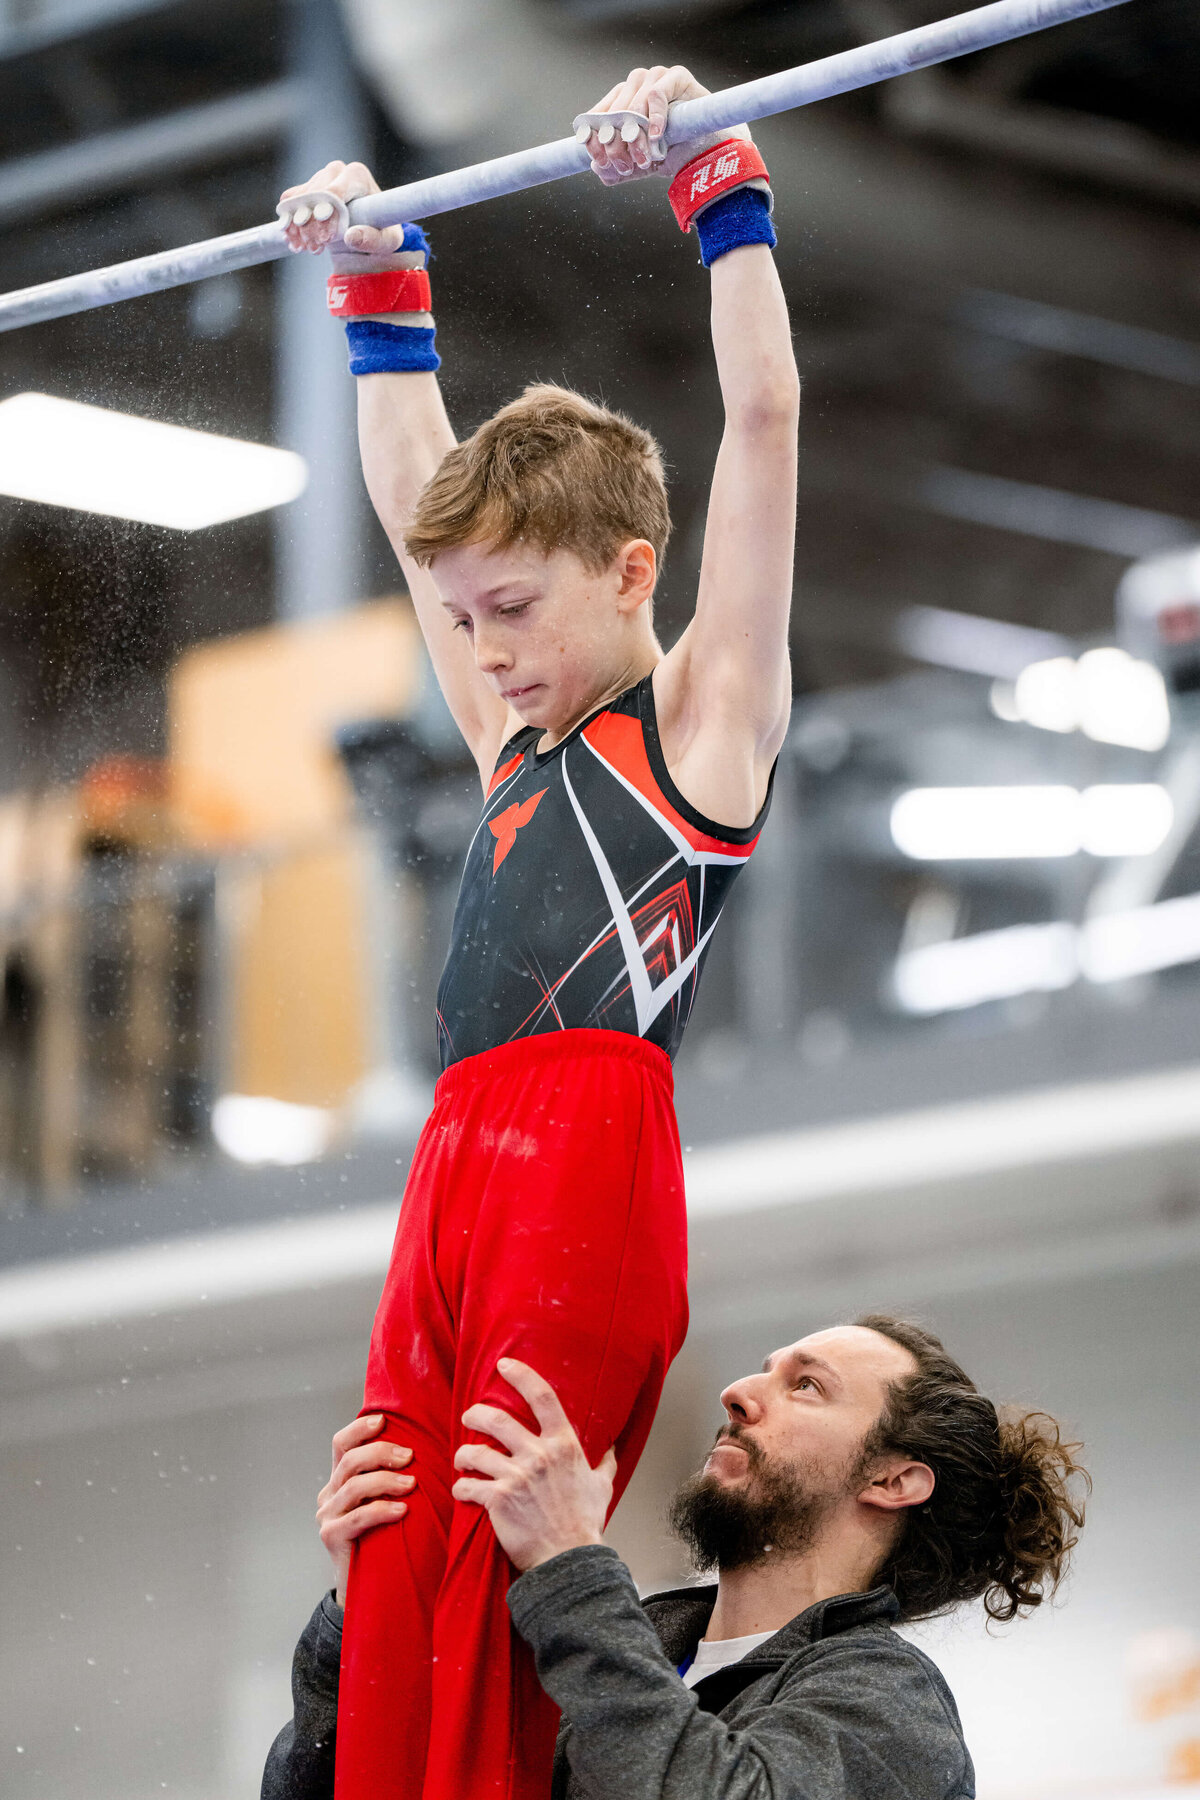 Photo by Luke O'Geil taken at the 2023 inaugural Grizzly Classic men's artistic gymnastics competitionA1_09207